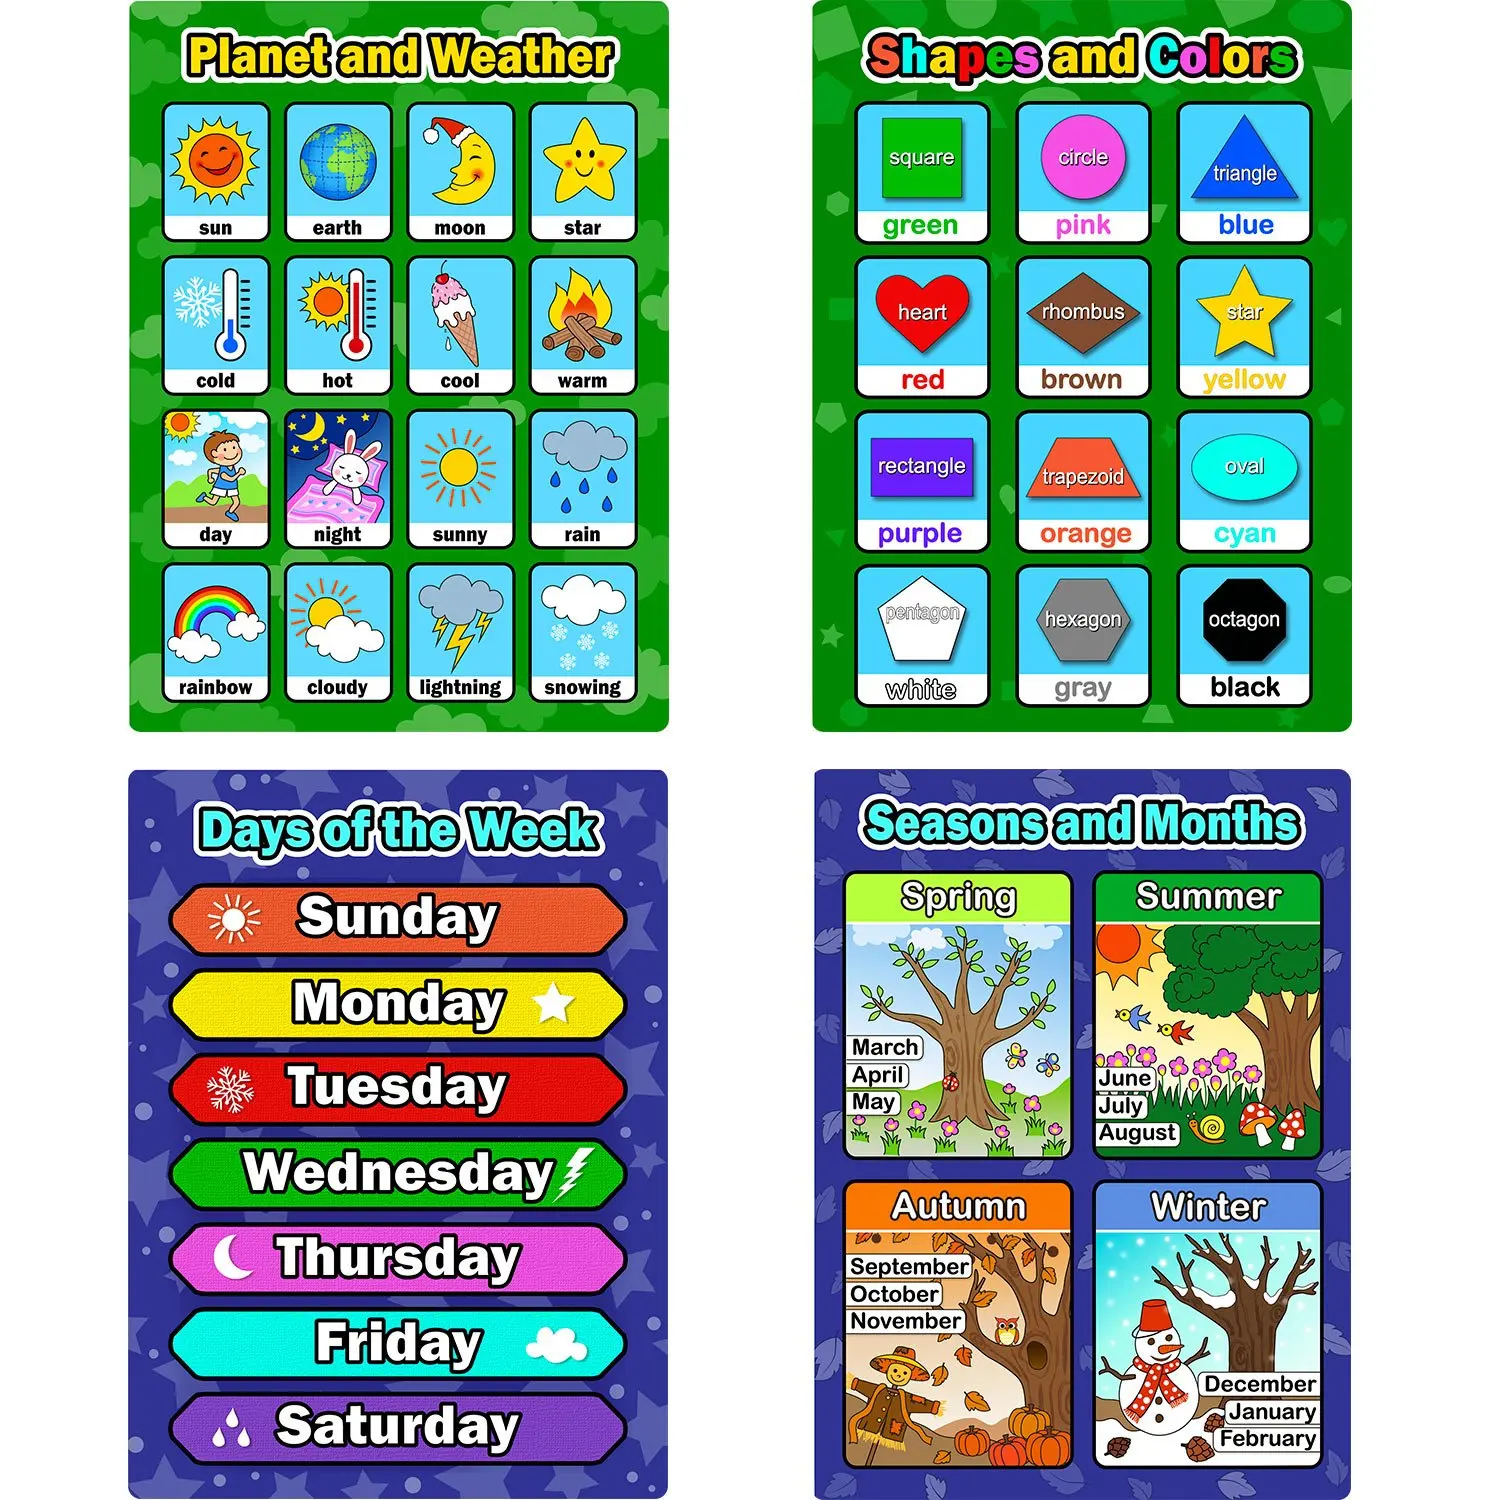 Months игры. Плакат Seasons and months. Seasons months Days of the week. Времена года и месяца. Months game.